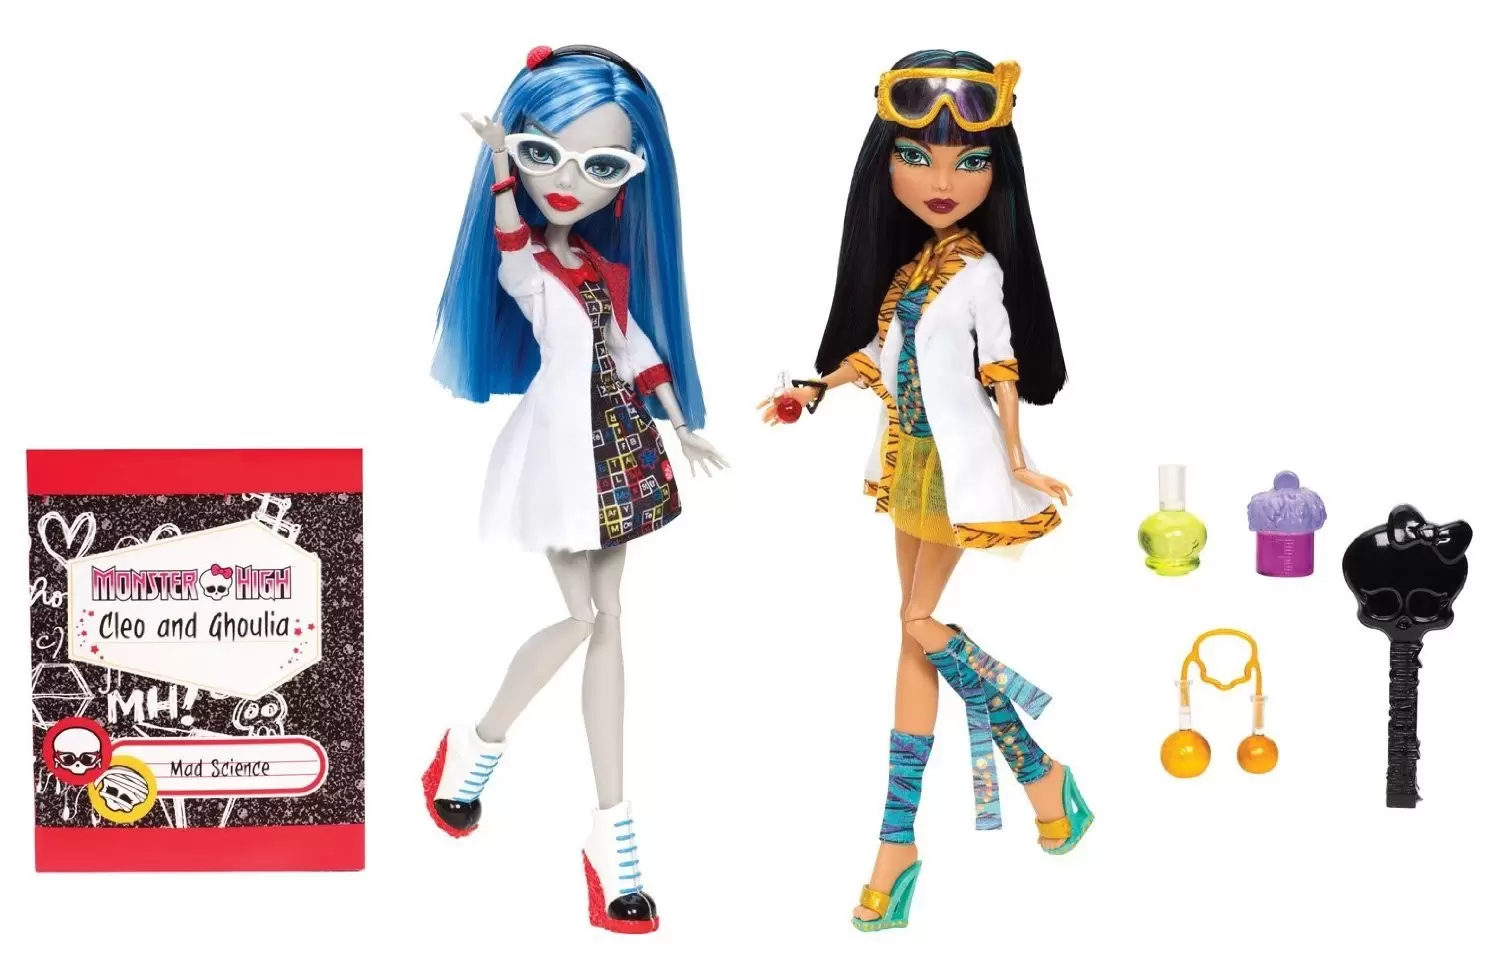 Monster High - Ghoulia Yelps & Cleo de Nile - Mad Science - Classroom